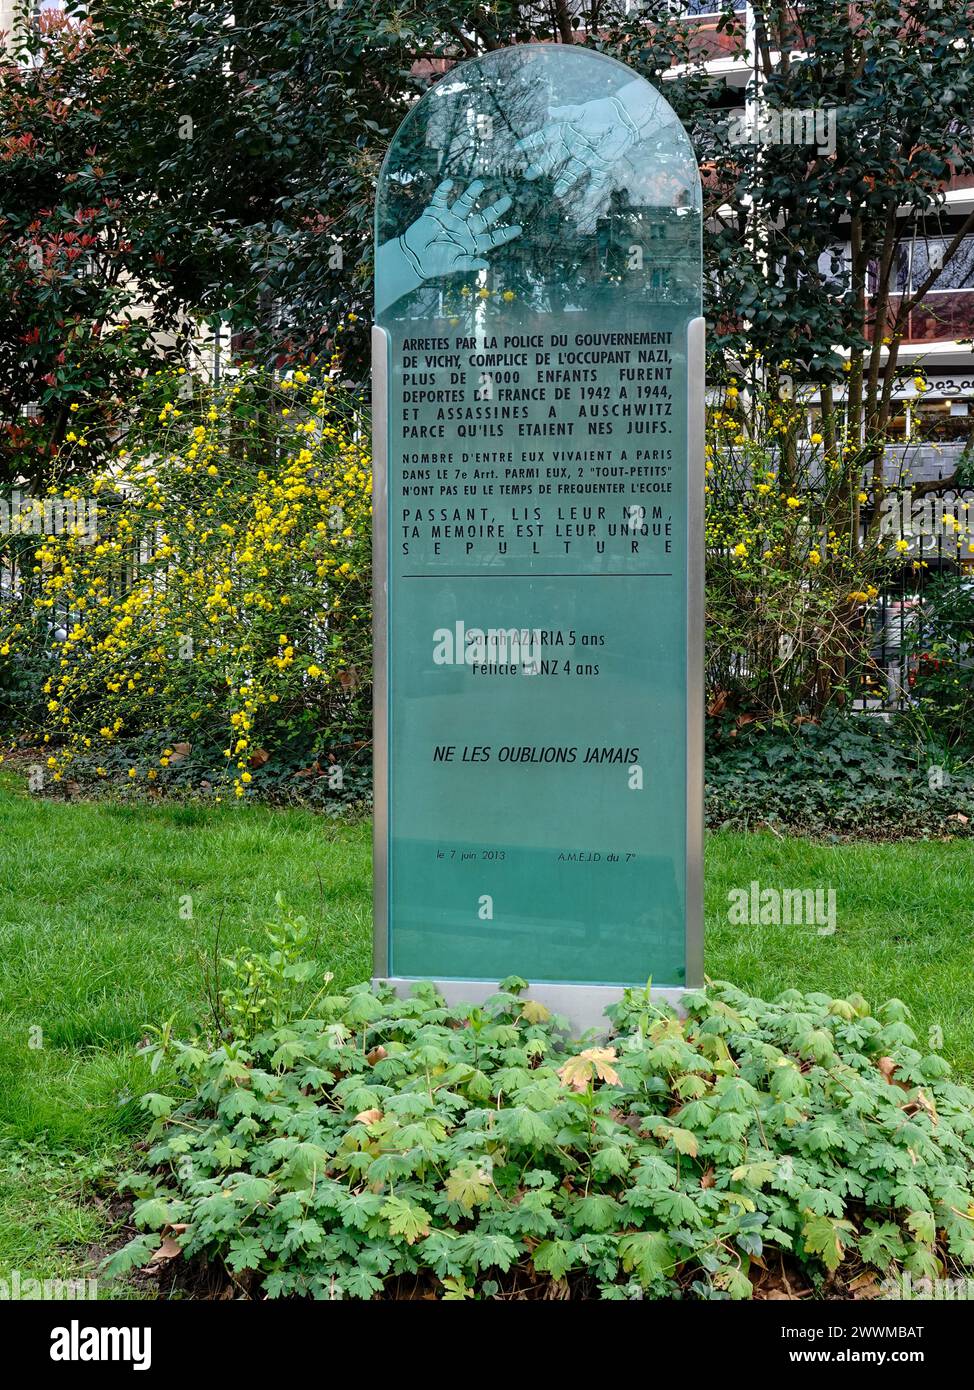 Memorial to more than 11,000 children who were deported from France from 1942-1944, and murdered in Auschwitz because they were born Jews, Paris, Fr. Stock Photo